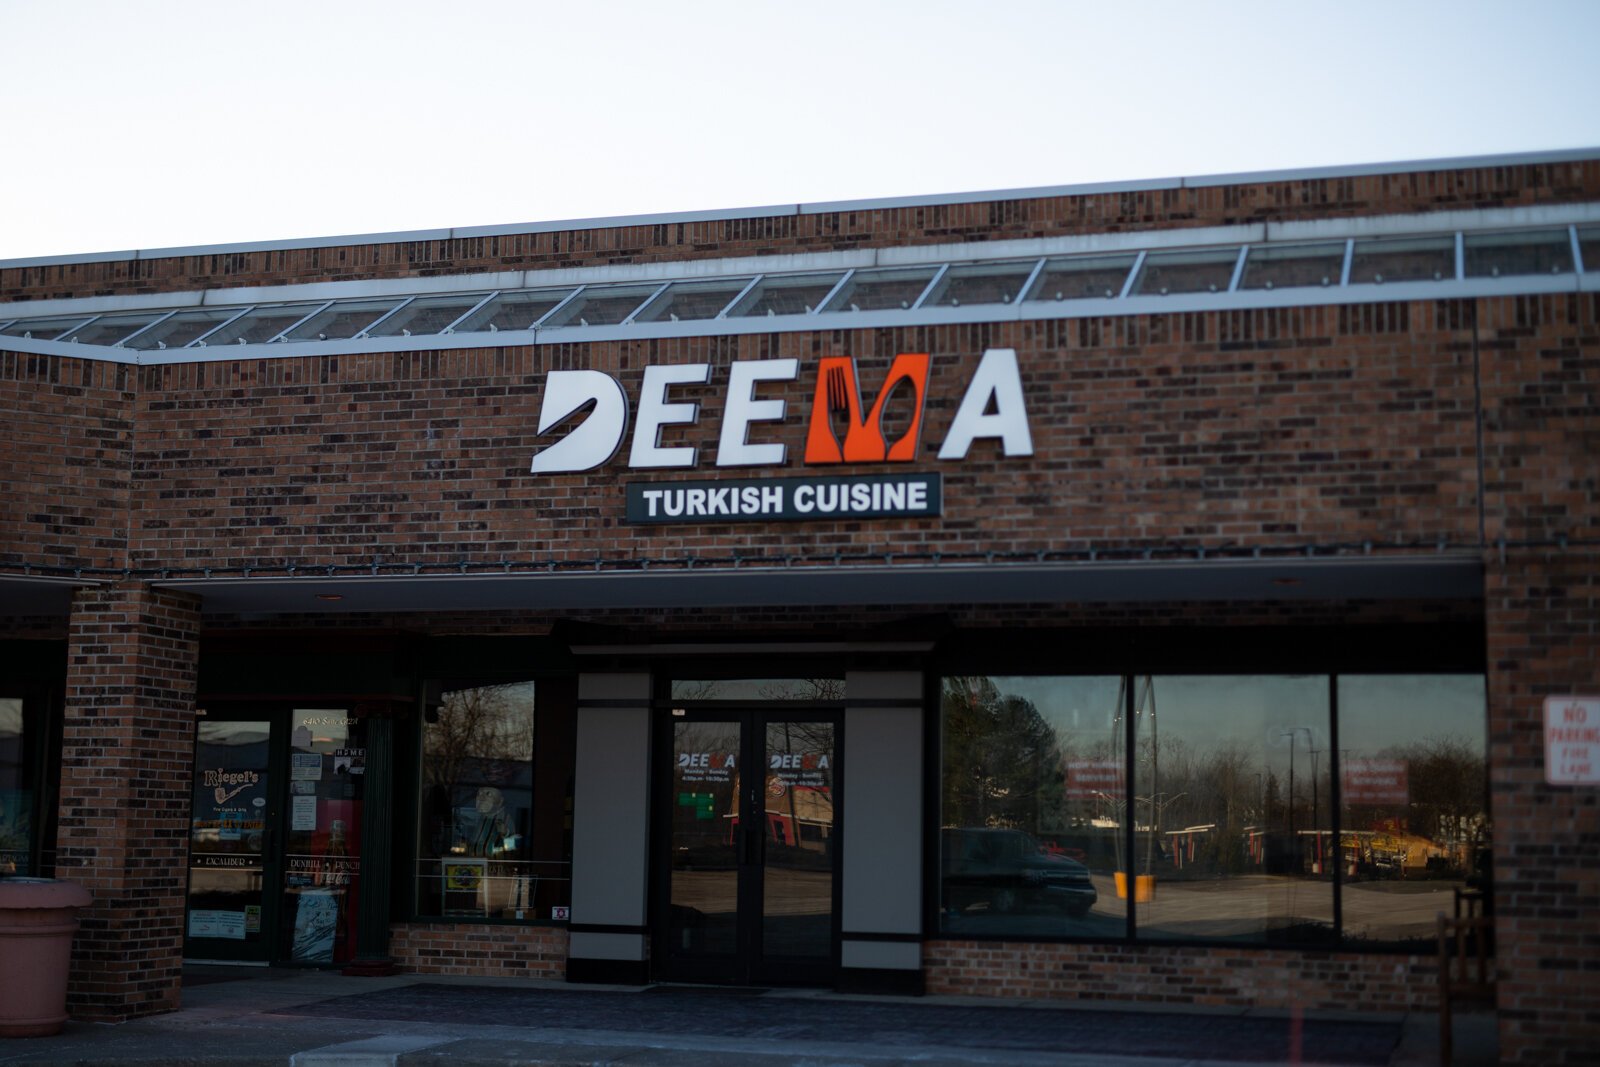 Deema is located in the former Yen Ching spot in Covington Plaza at 6410 W. Jefferson Blvd.